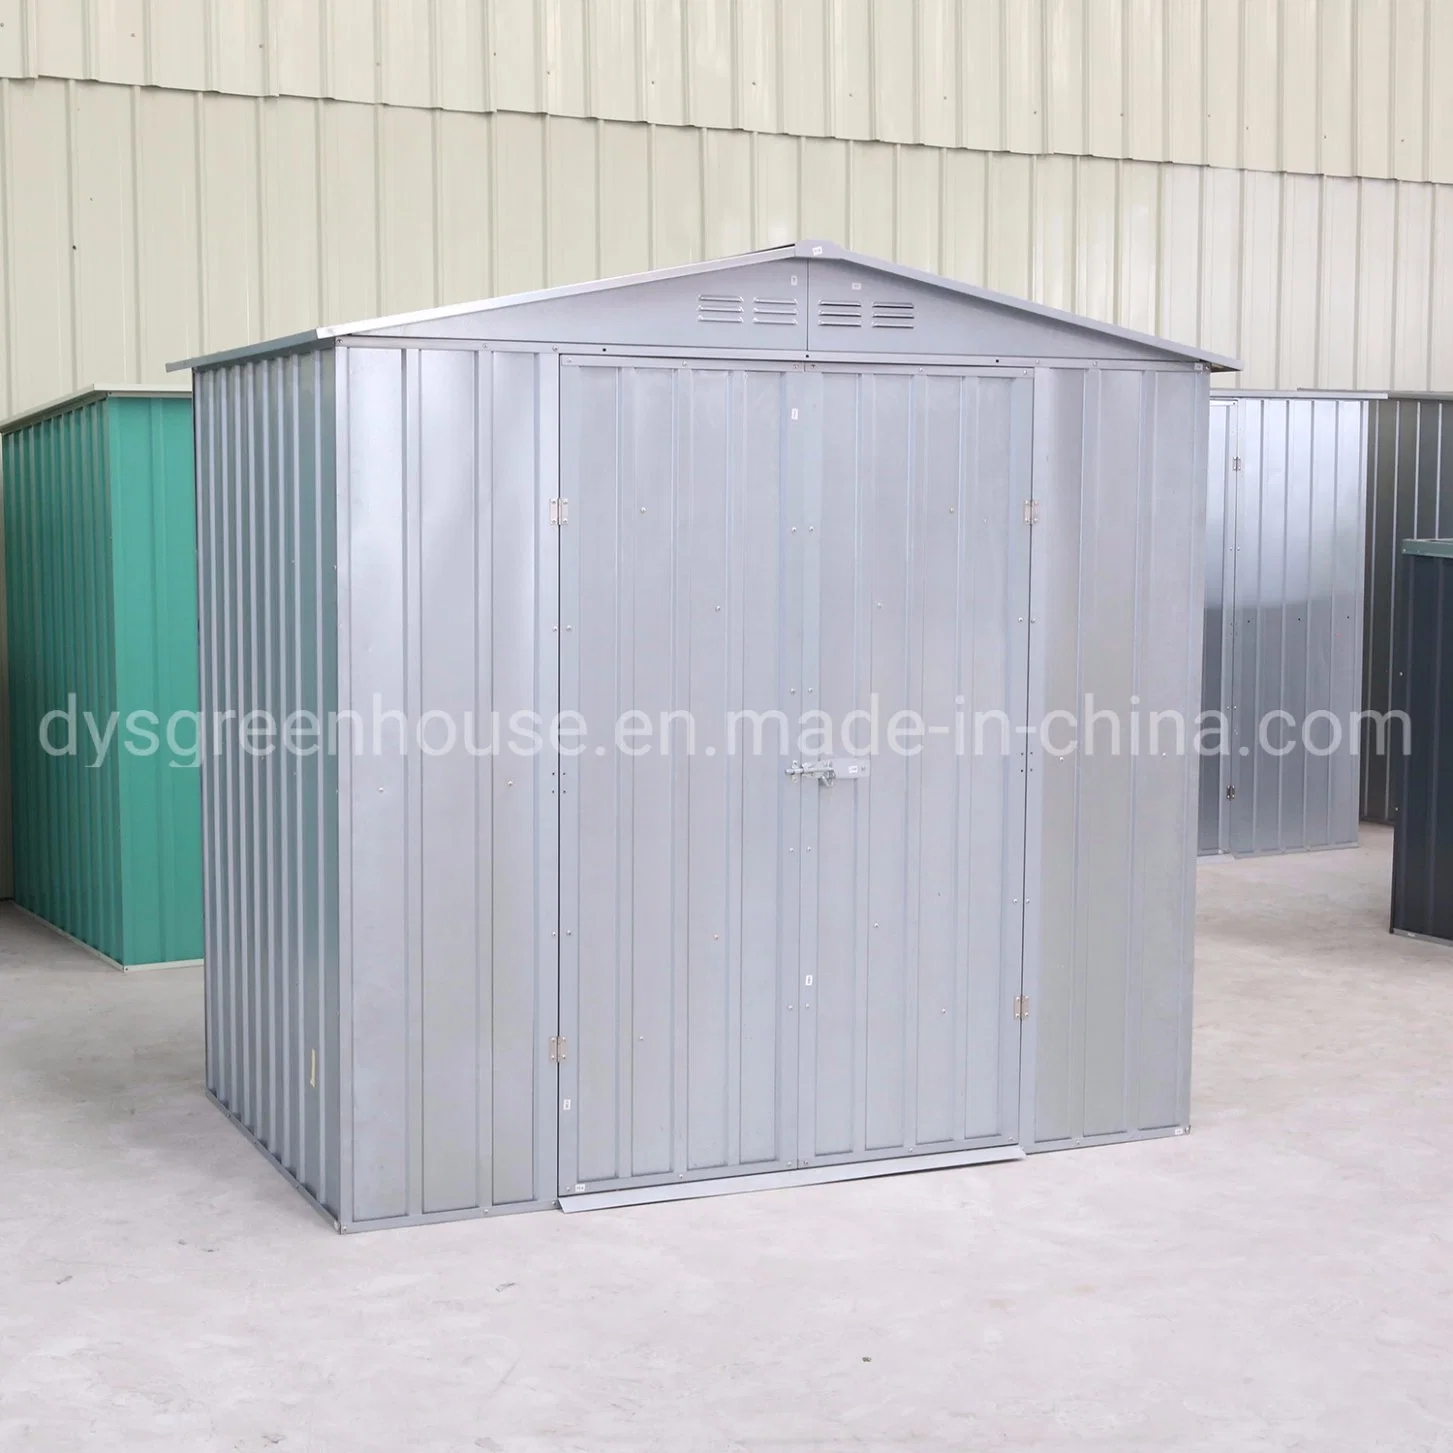 Low Price Garden Shed/Tool House (RDSA6X4-Z2)